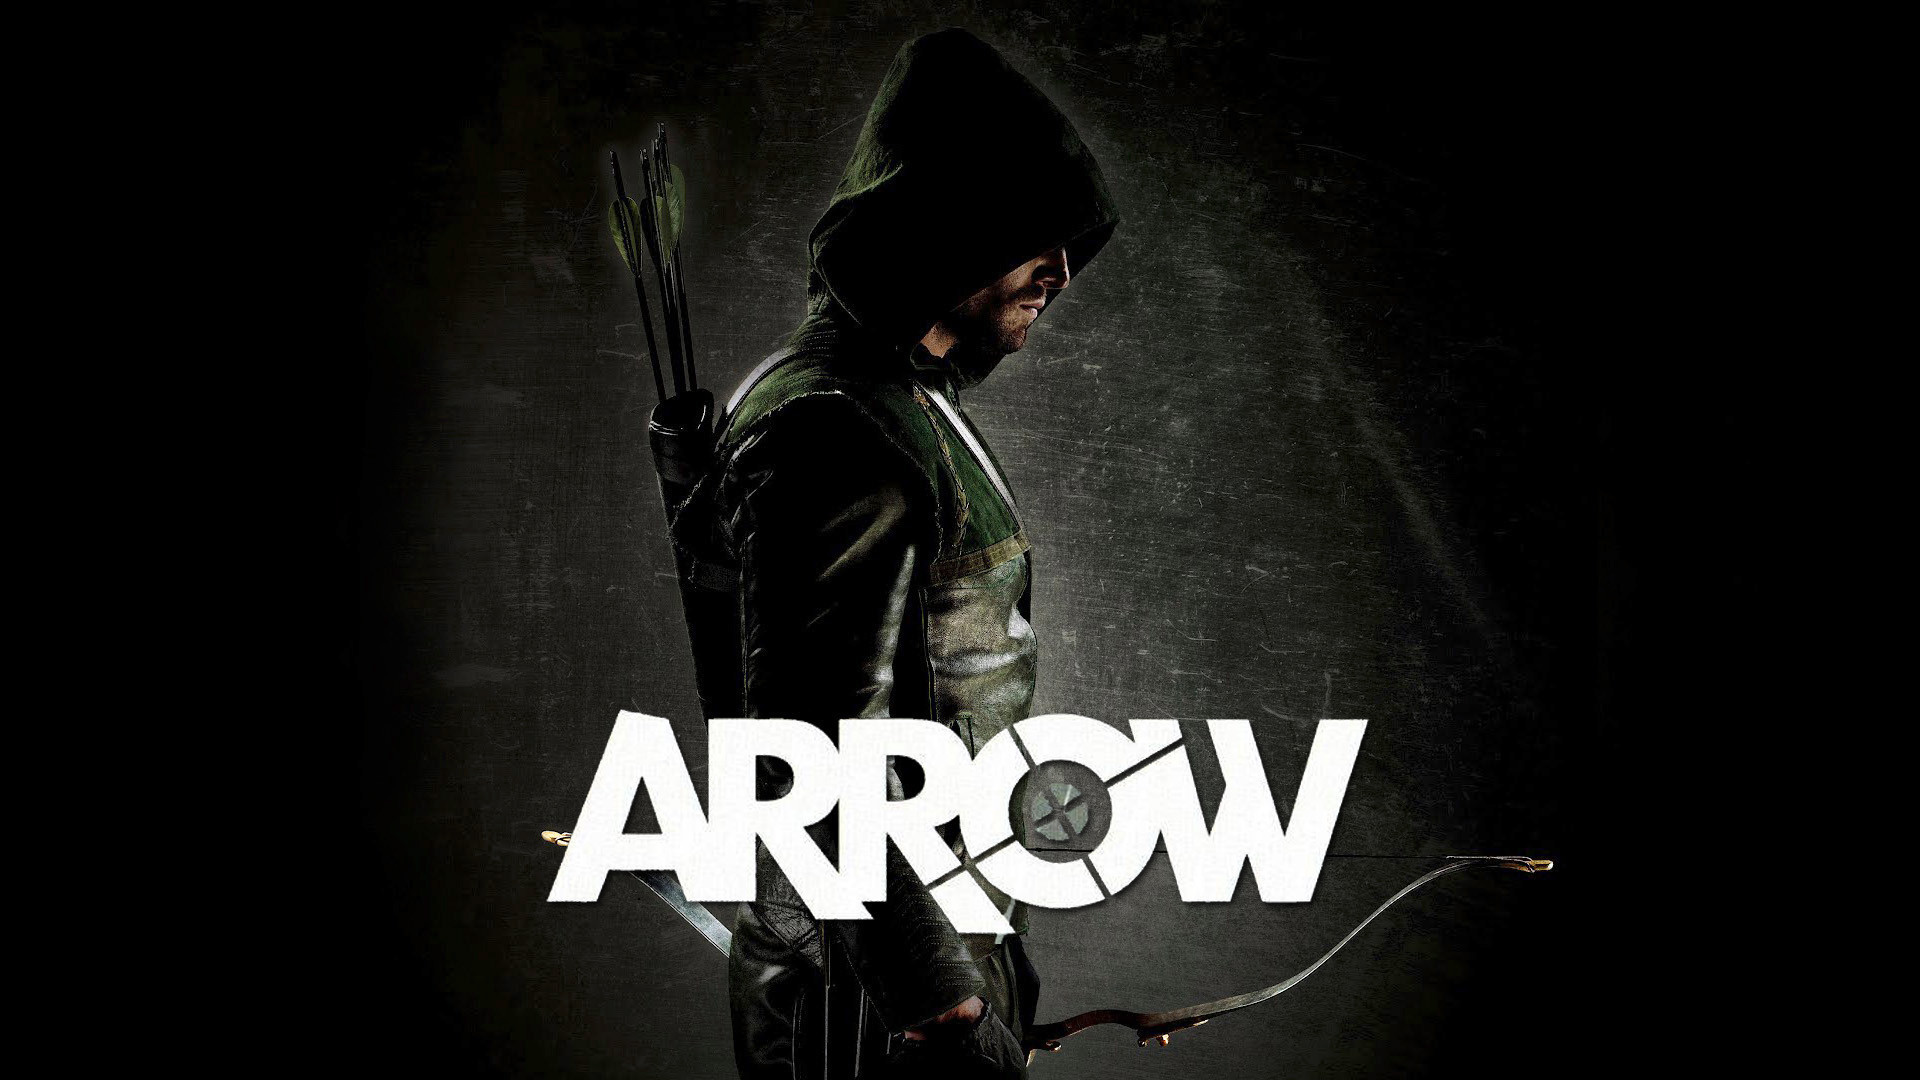 Arrow Wallpapers, Pictures, Images